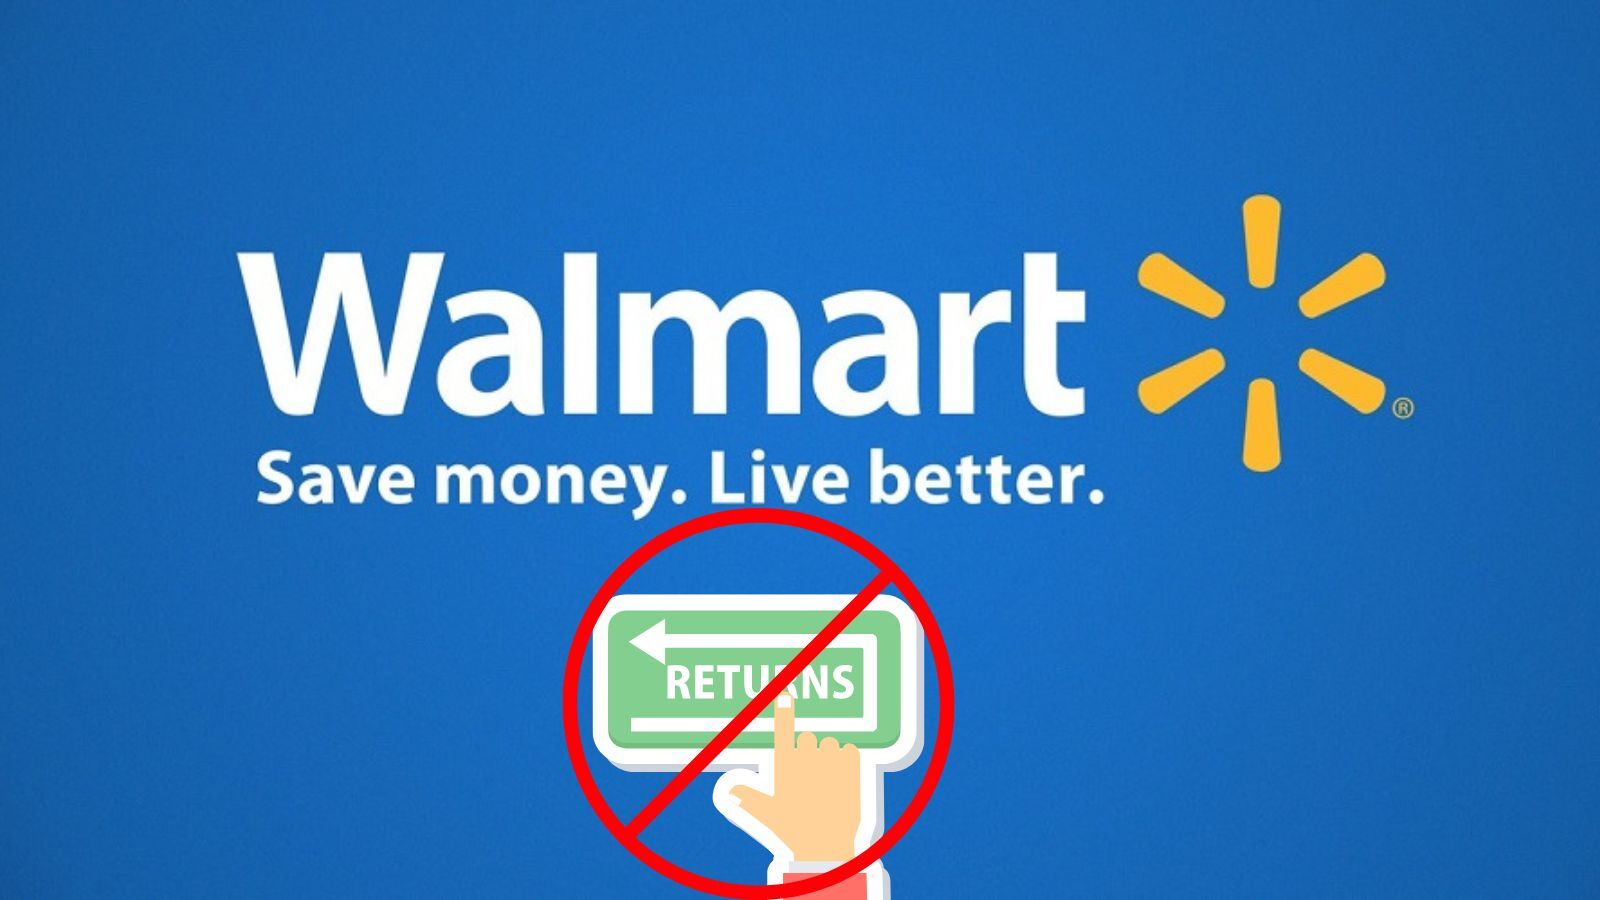 What Items Cannot Be Returned to Walmart?